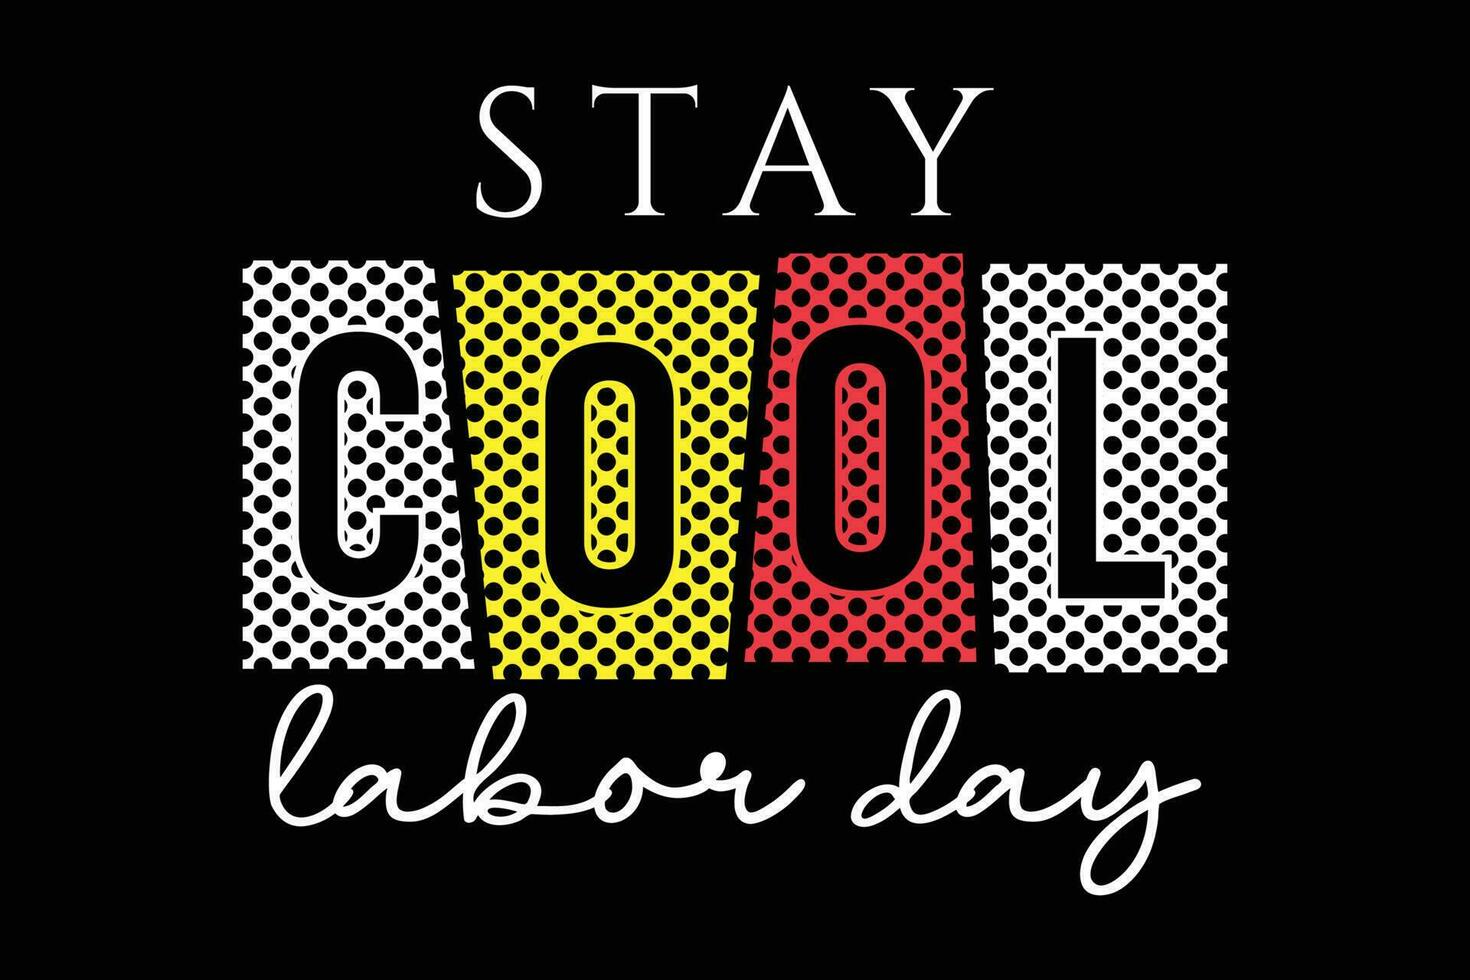 Stay cool labor day professional colorful typography t shirt design vector